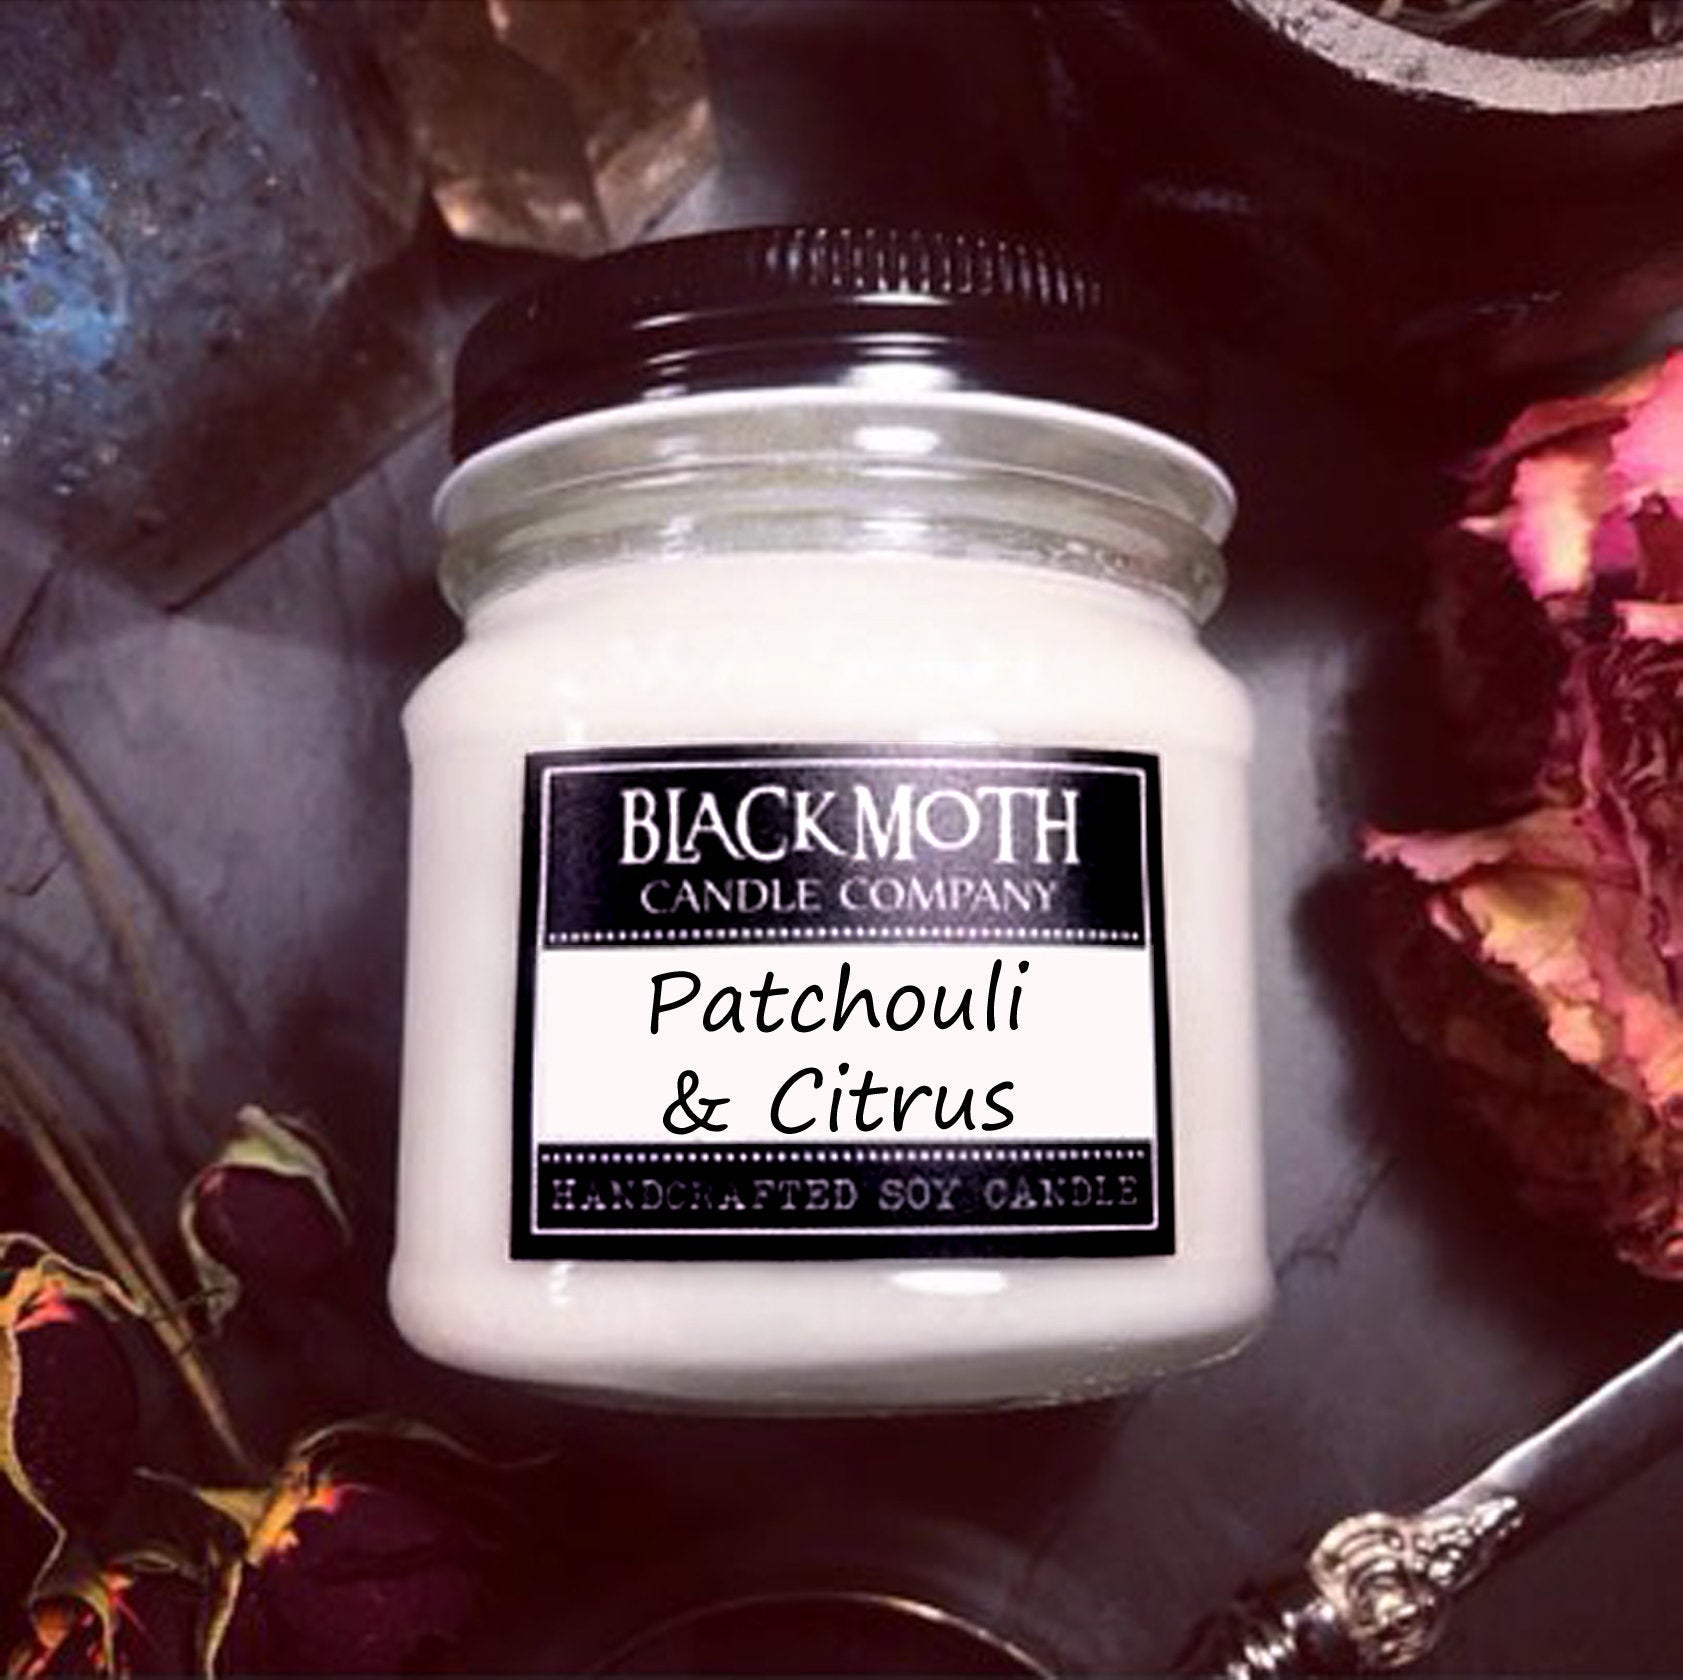 8 oz Patchouli & Citrus Scented Soy Candle in Mason Jar